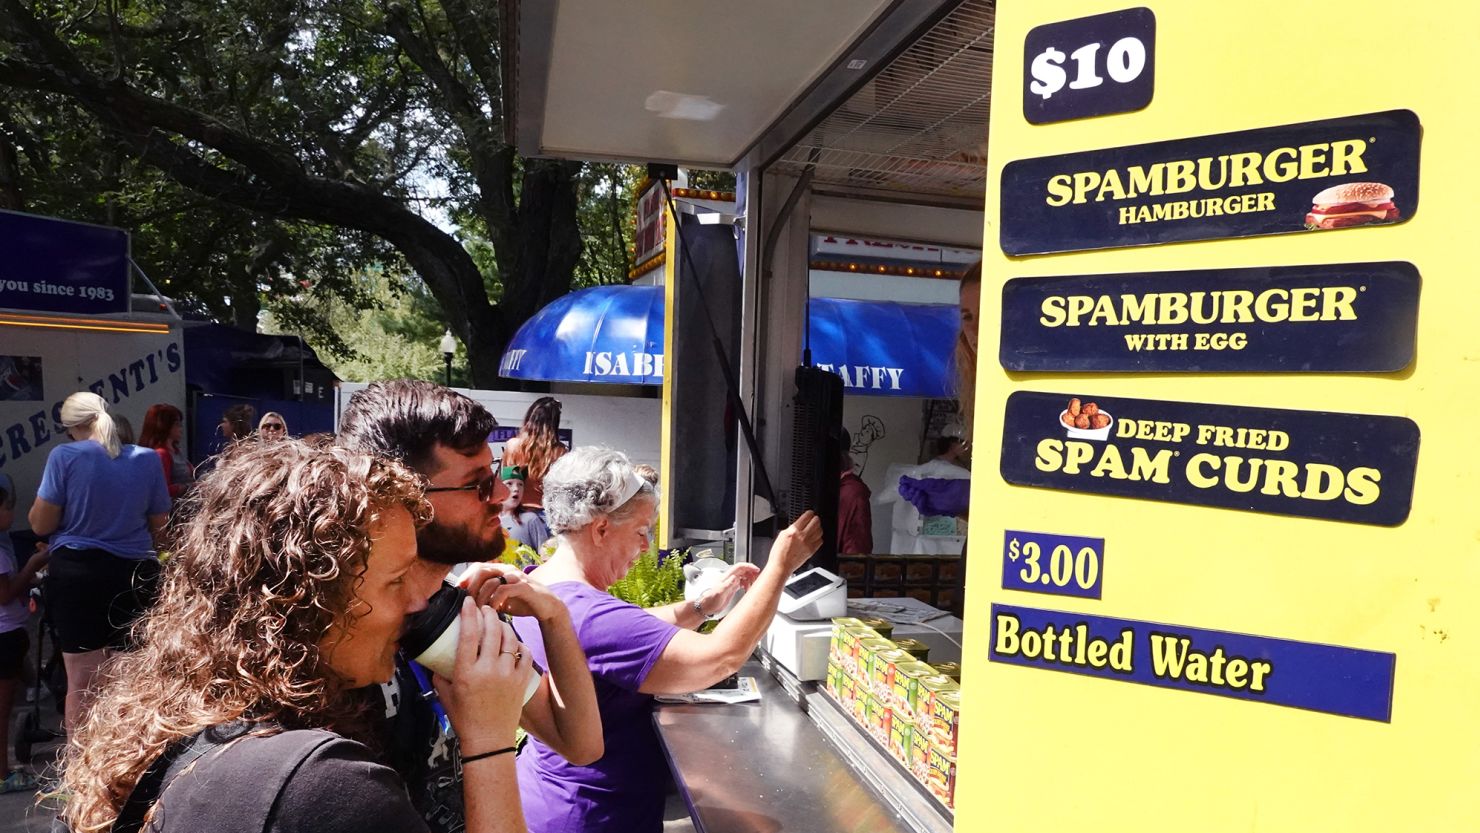 How Spam became one of the most iconic American brands of all time